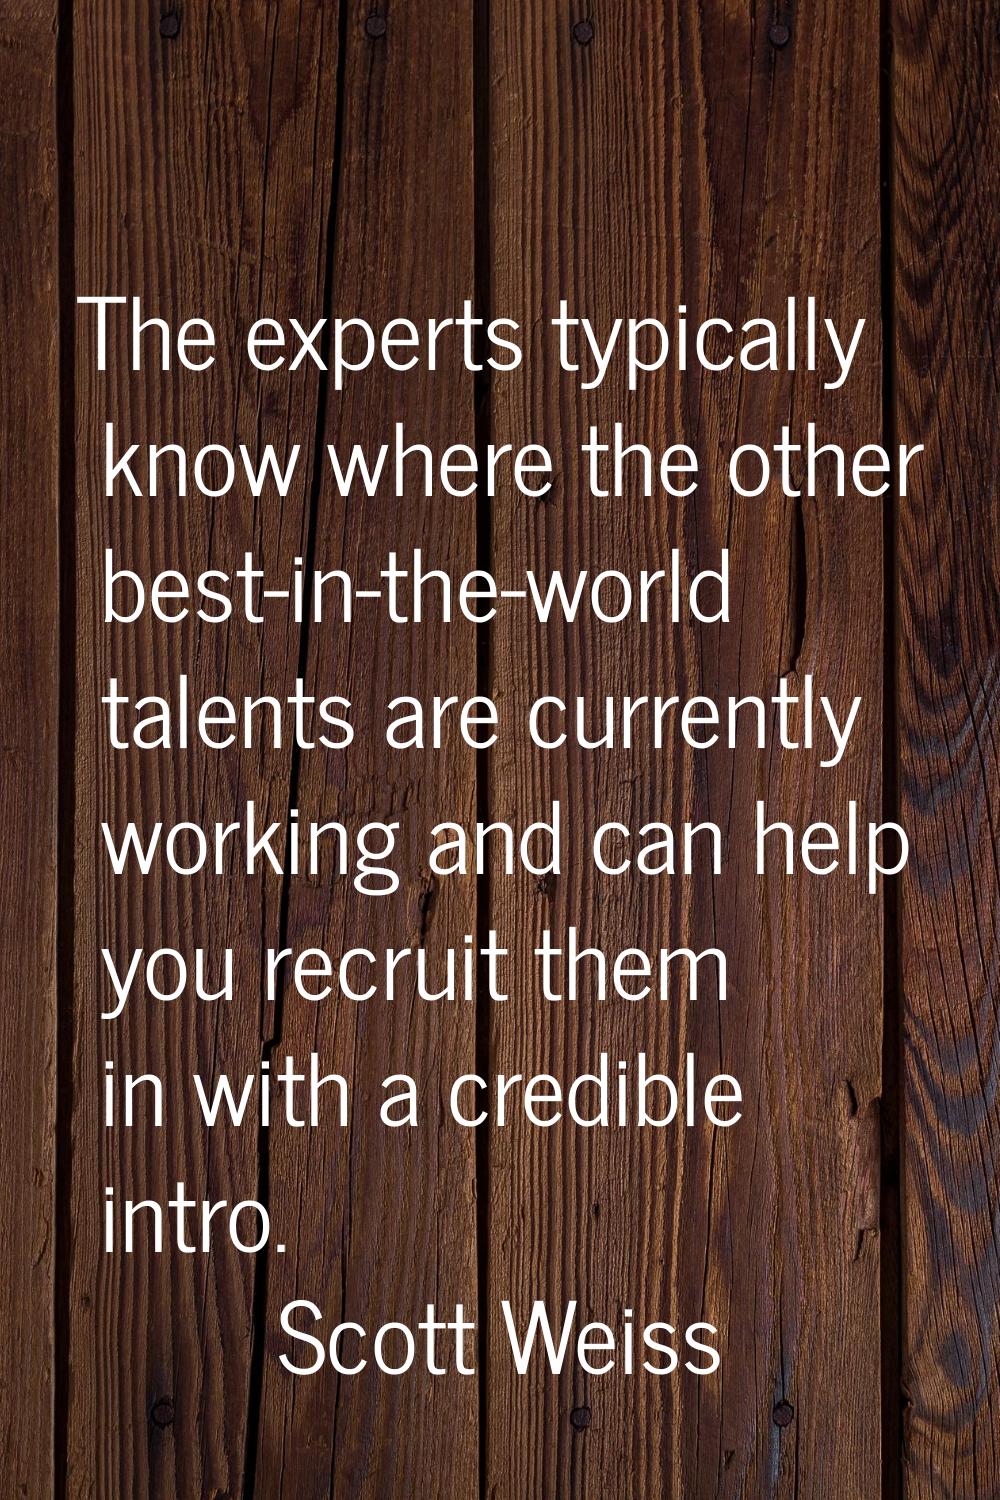 The experts typically know where the other best-in-the-world talents are currently working and can 